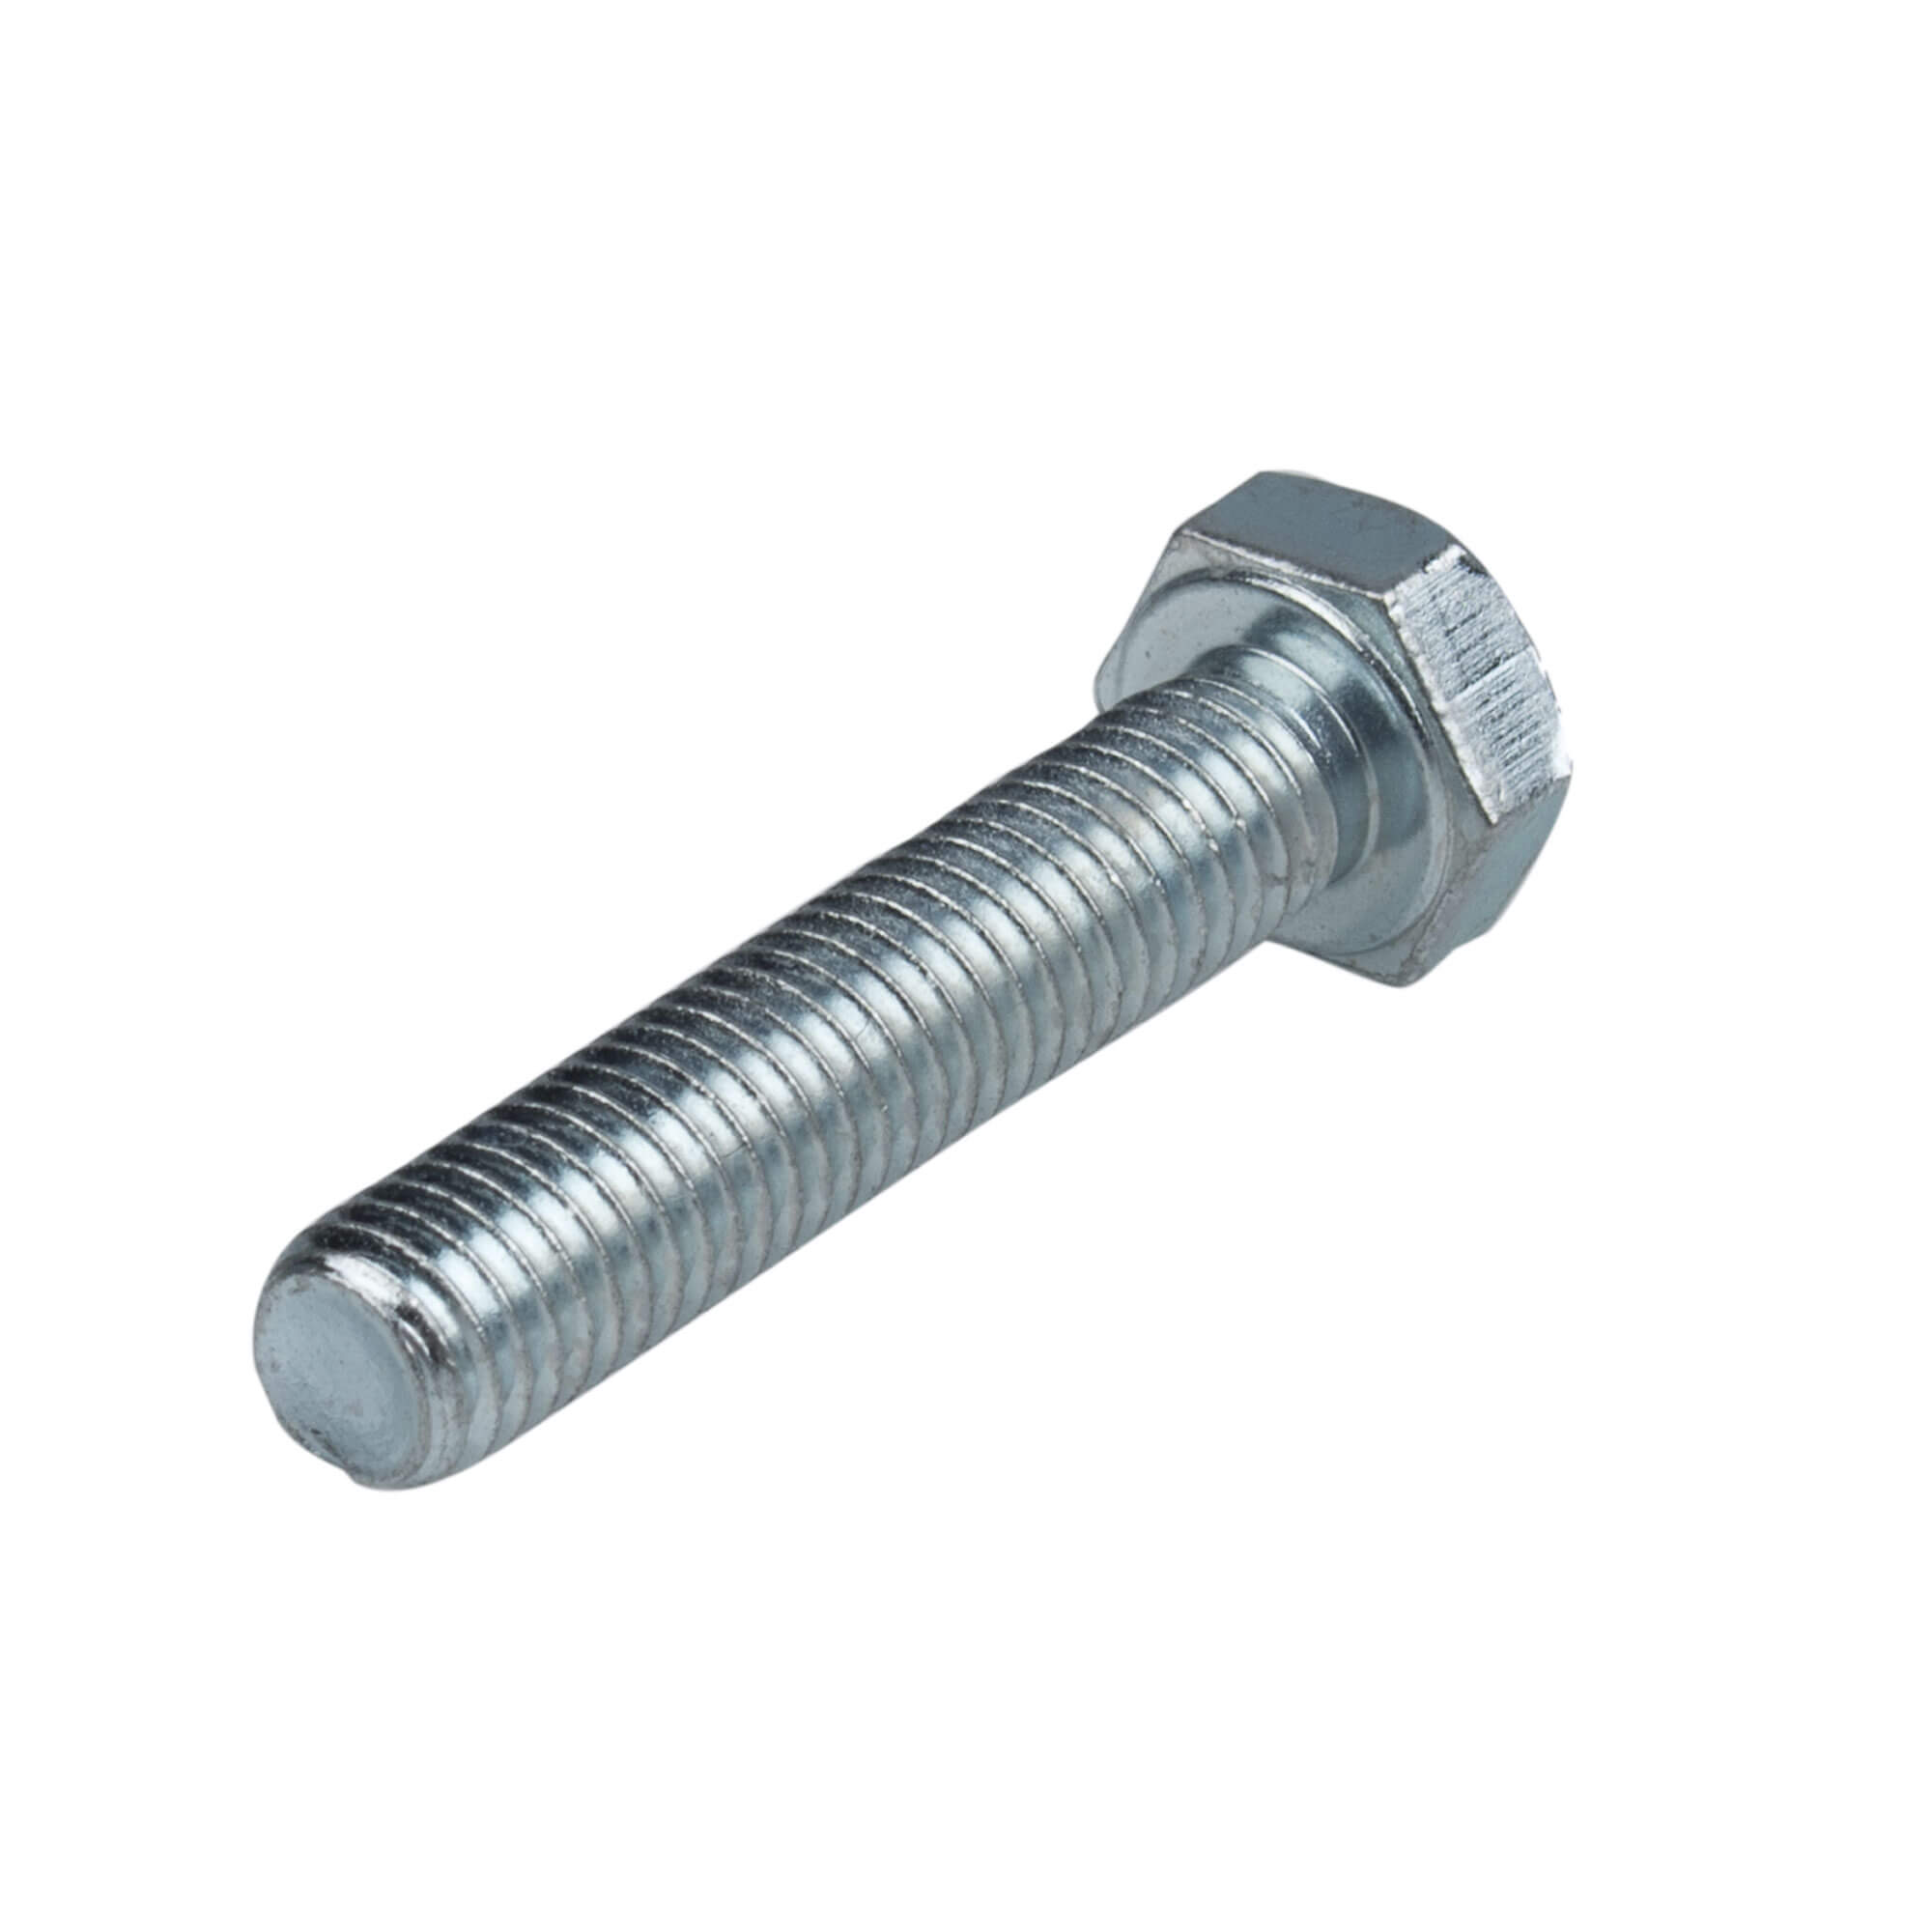 AA M8x40 bolt - spare part for Cancan manual juicer